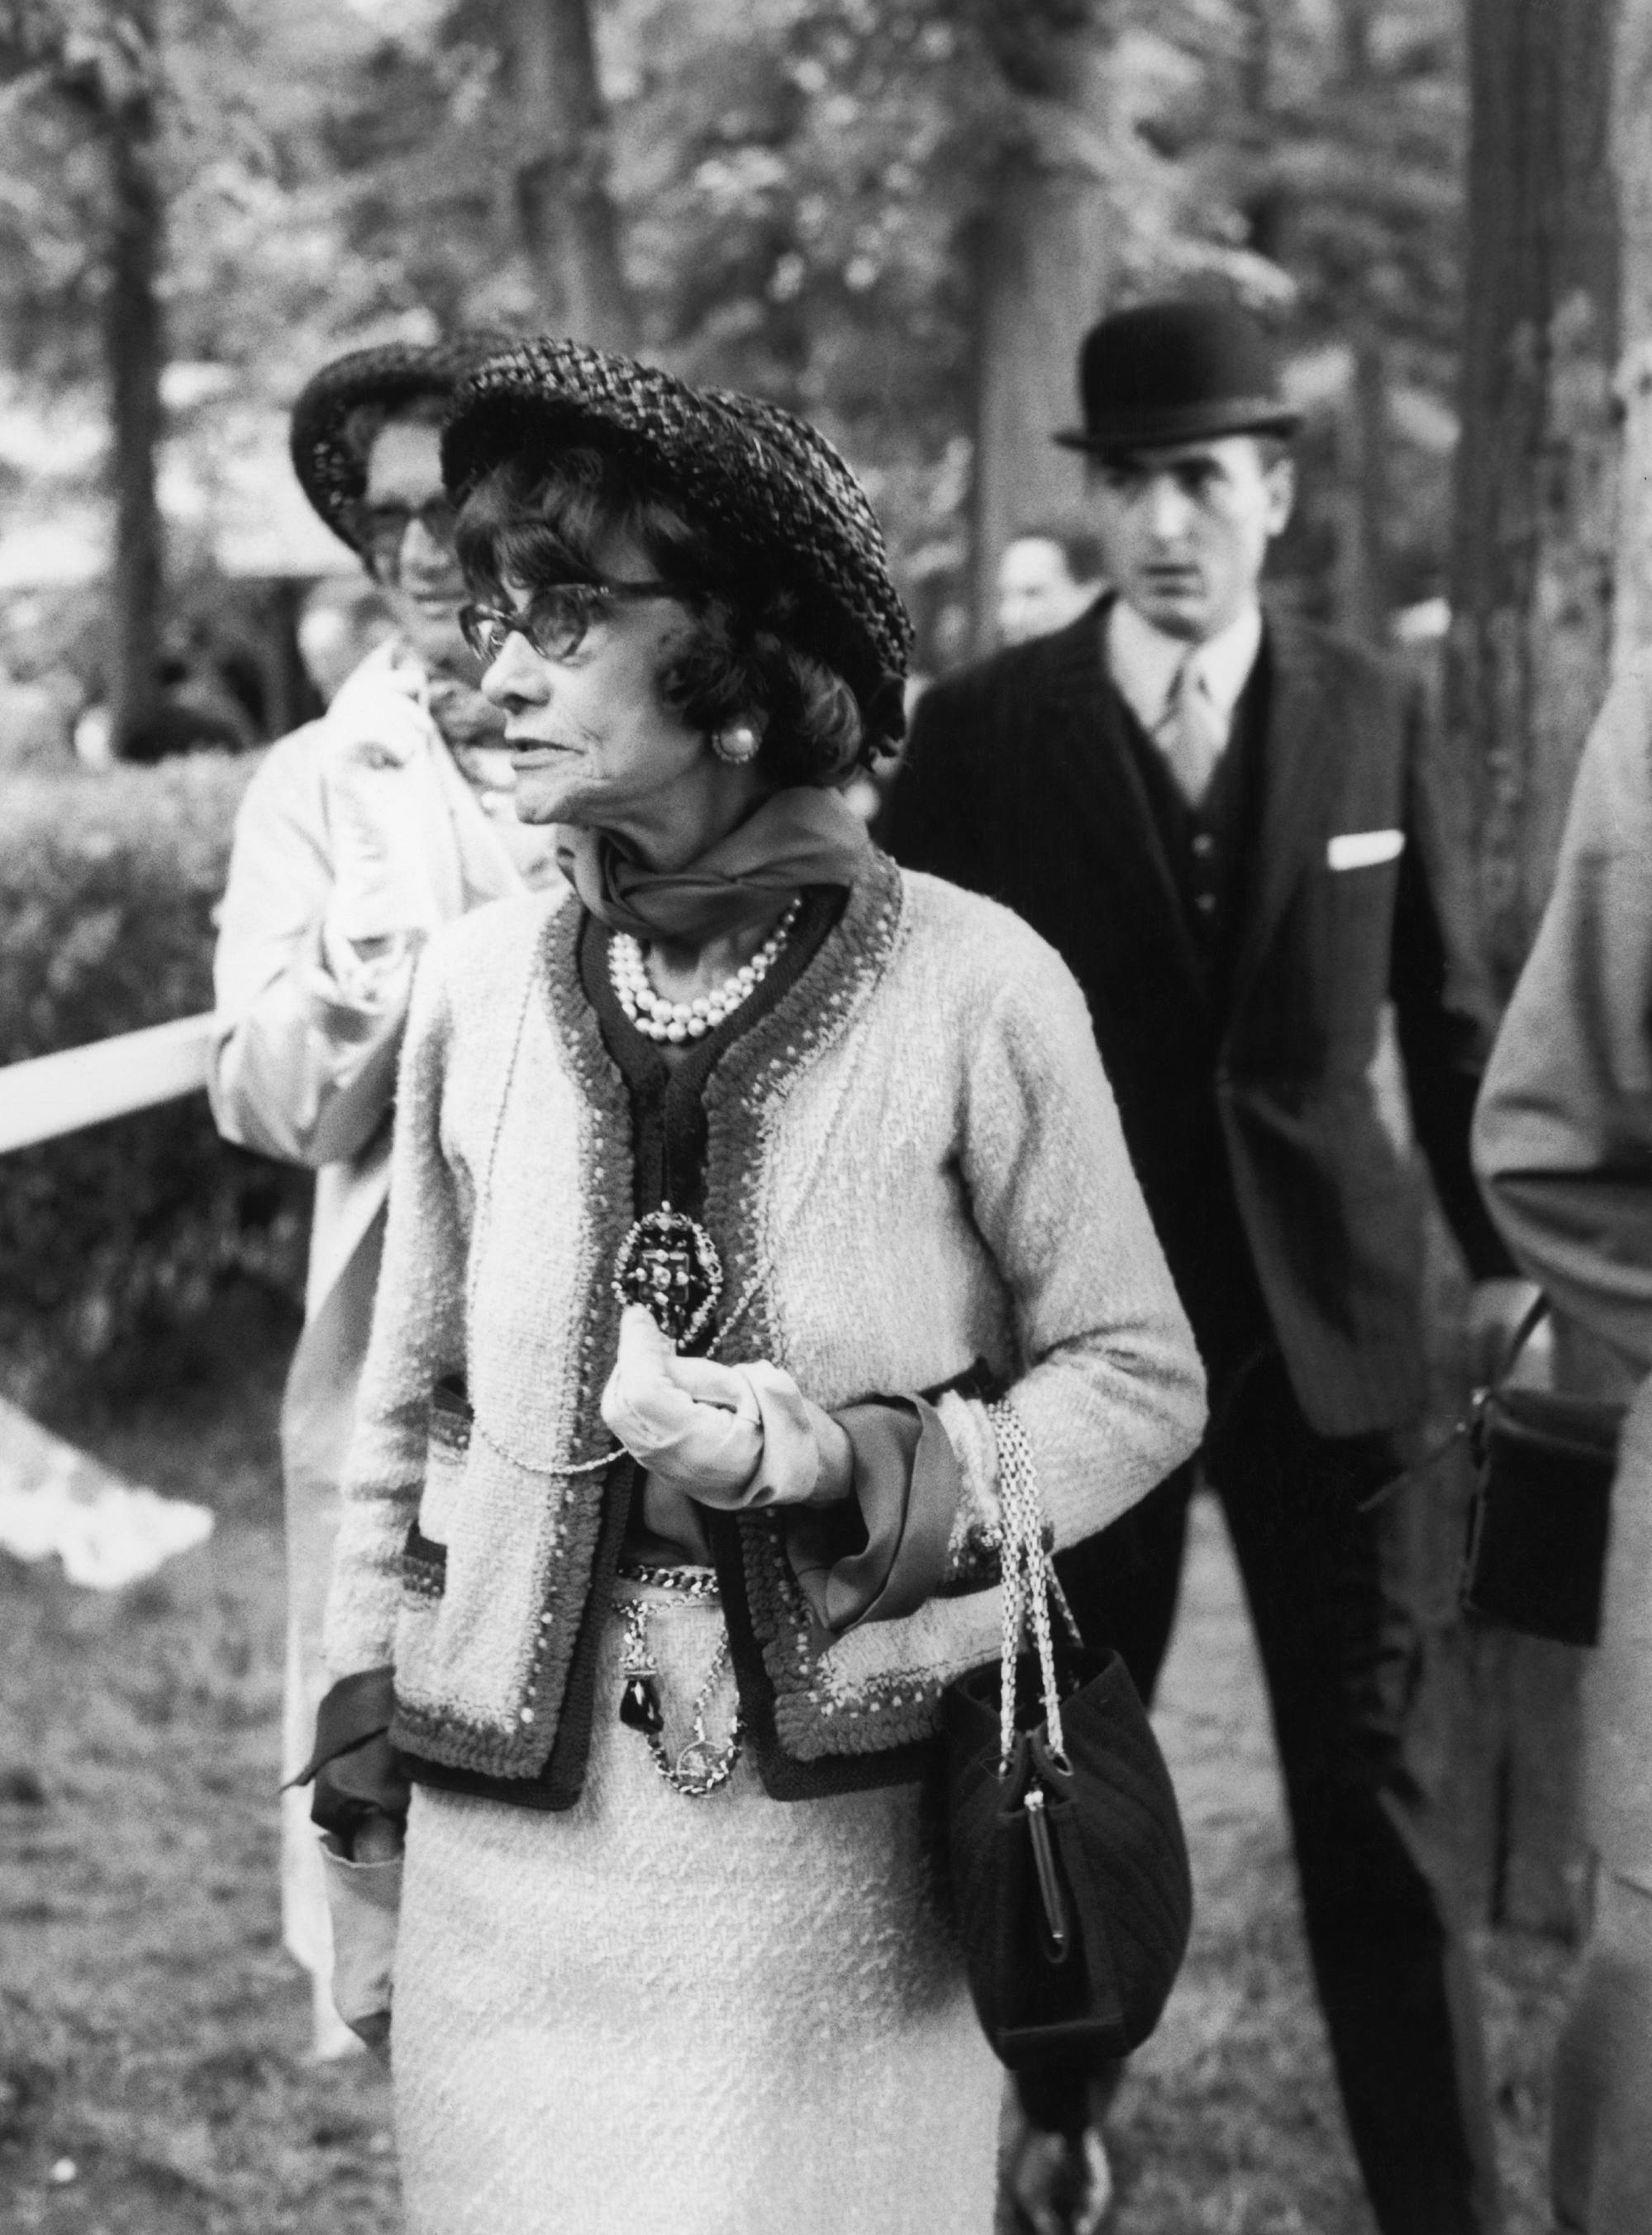 From Elegant Fashion to the Iconic Chanel No. 5 Fragrance: Coco Chanel's  Legacy and Net Worth